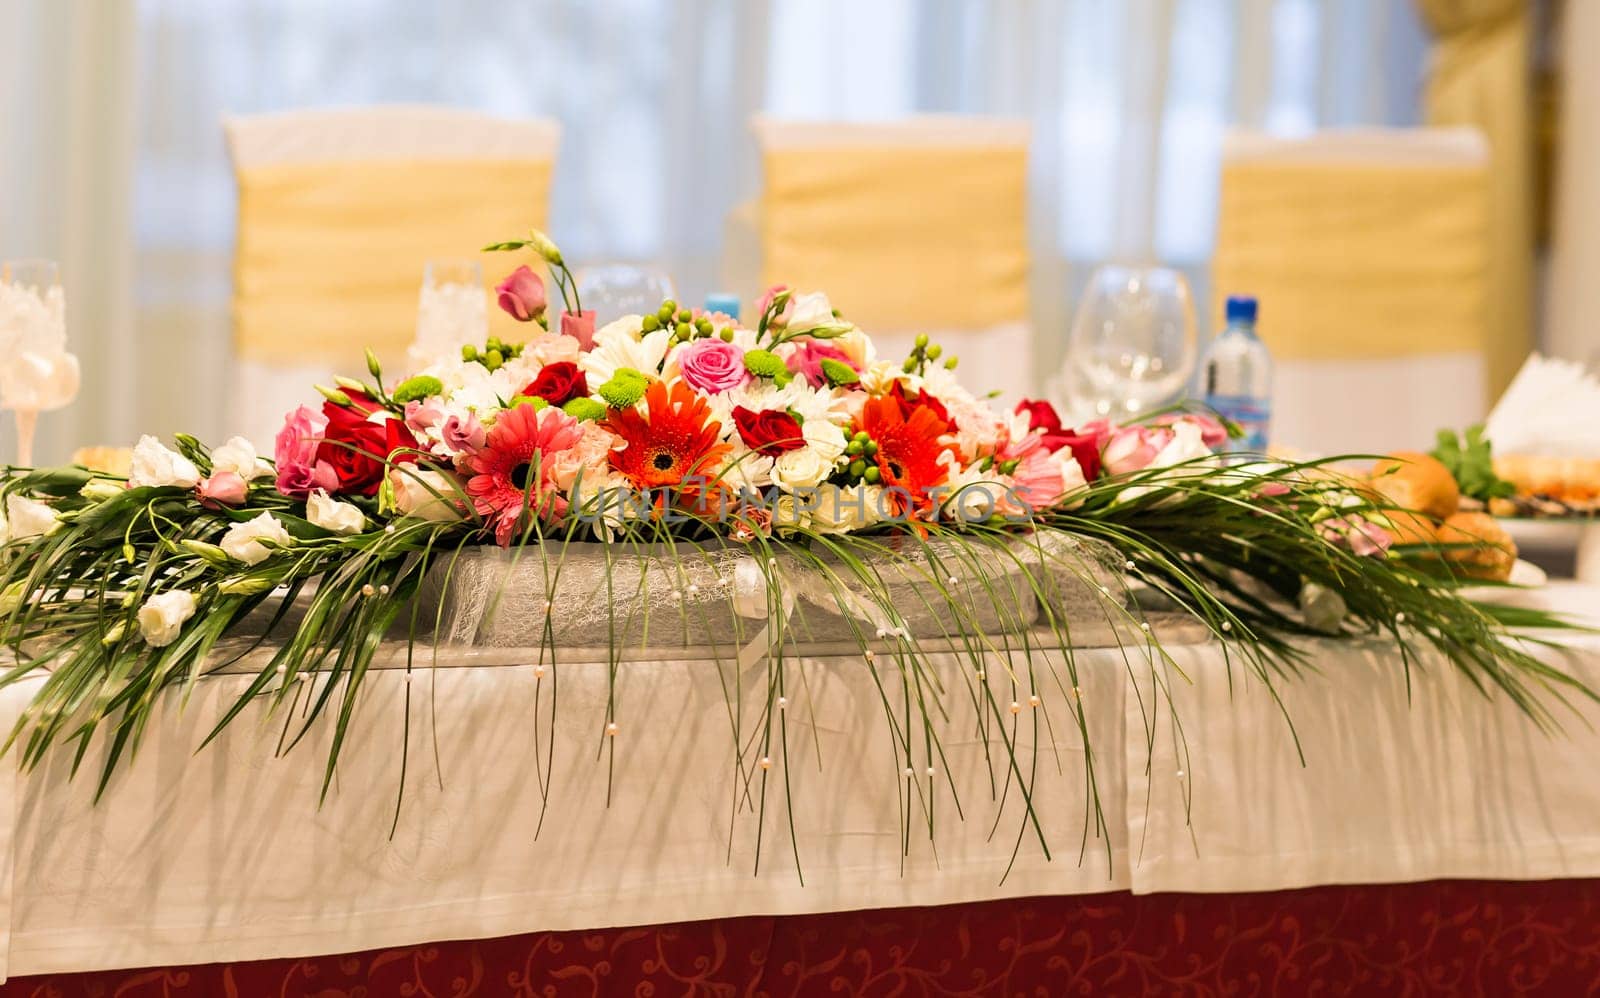 Beautiful flowers on table in wedding day by Satura86